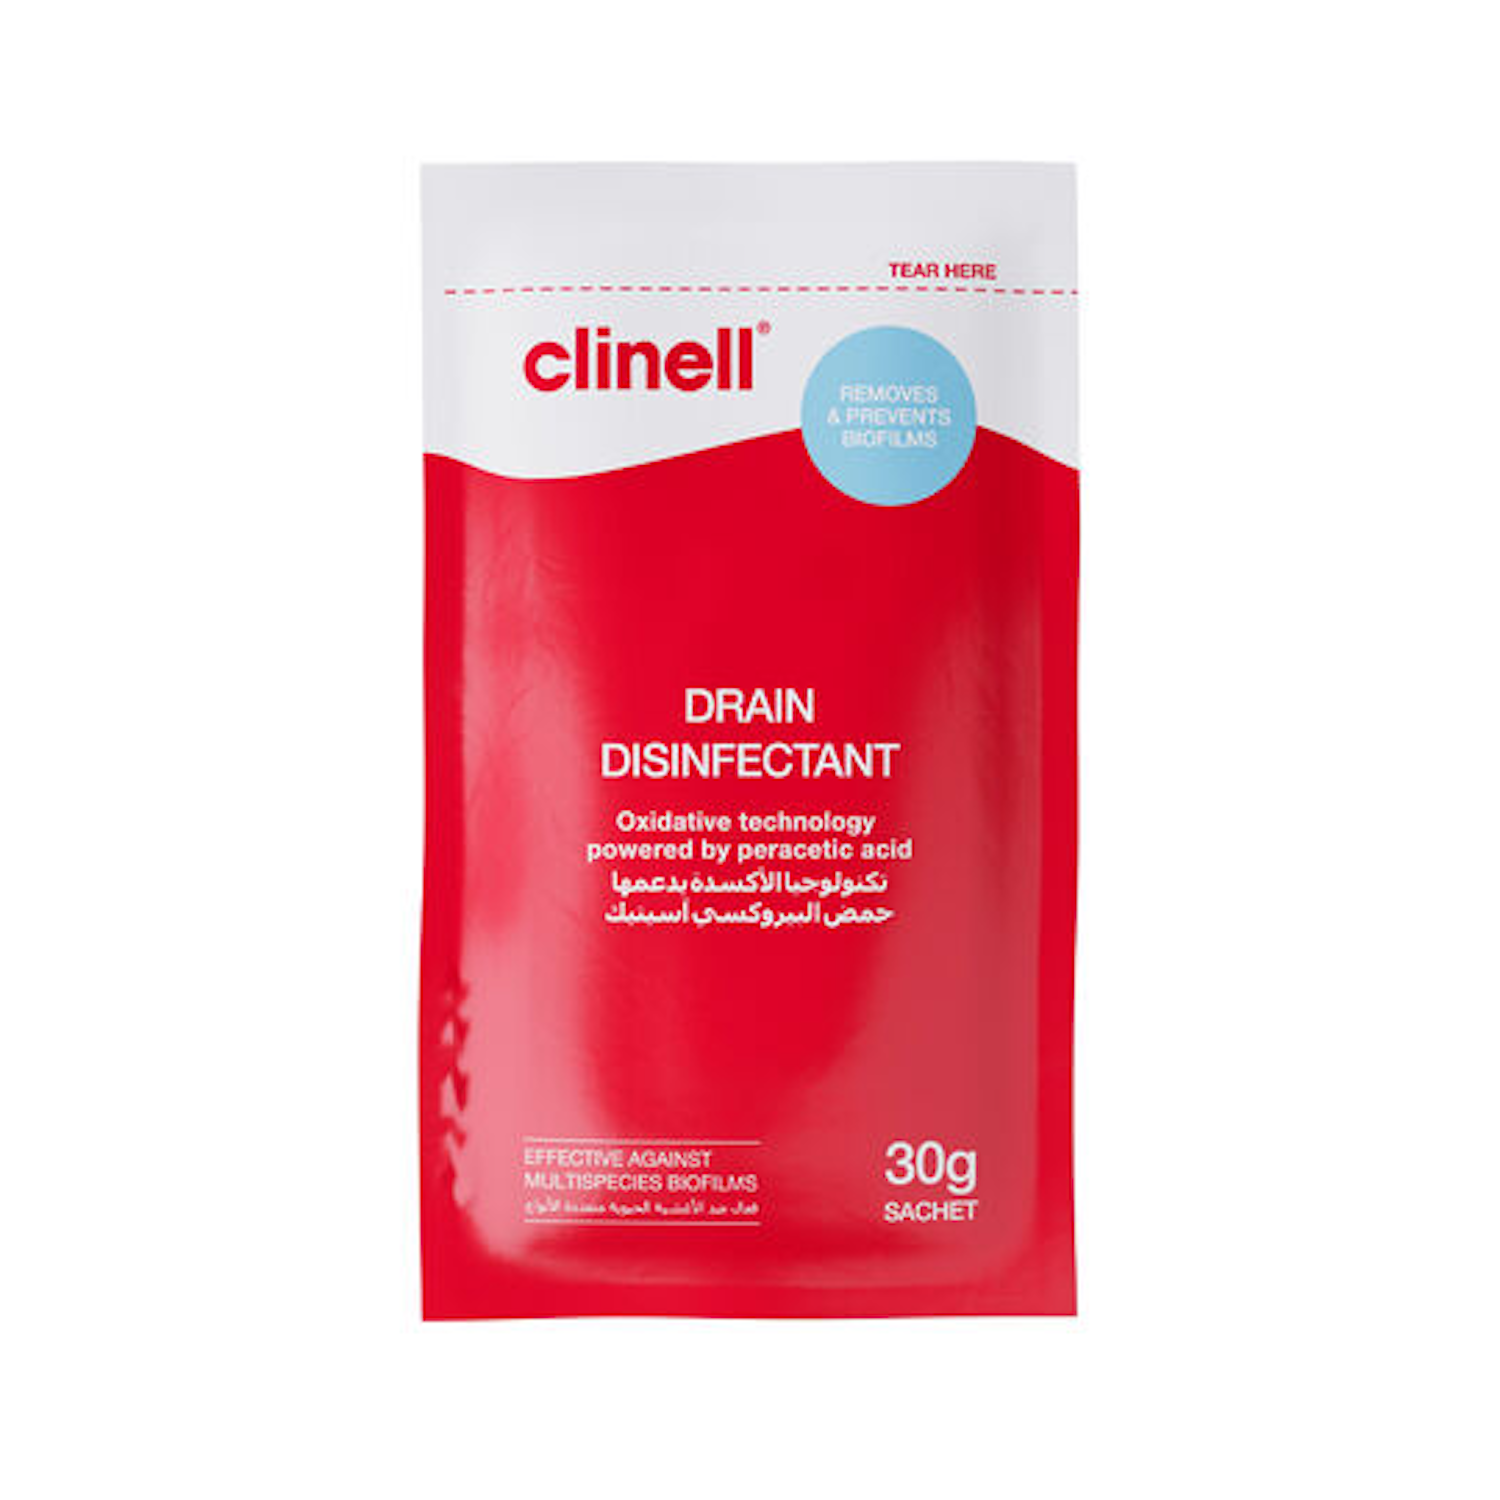 Clinell Drain Disinfectant Sachets | 30g | Pack of 24 (2)